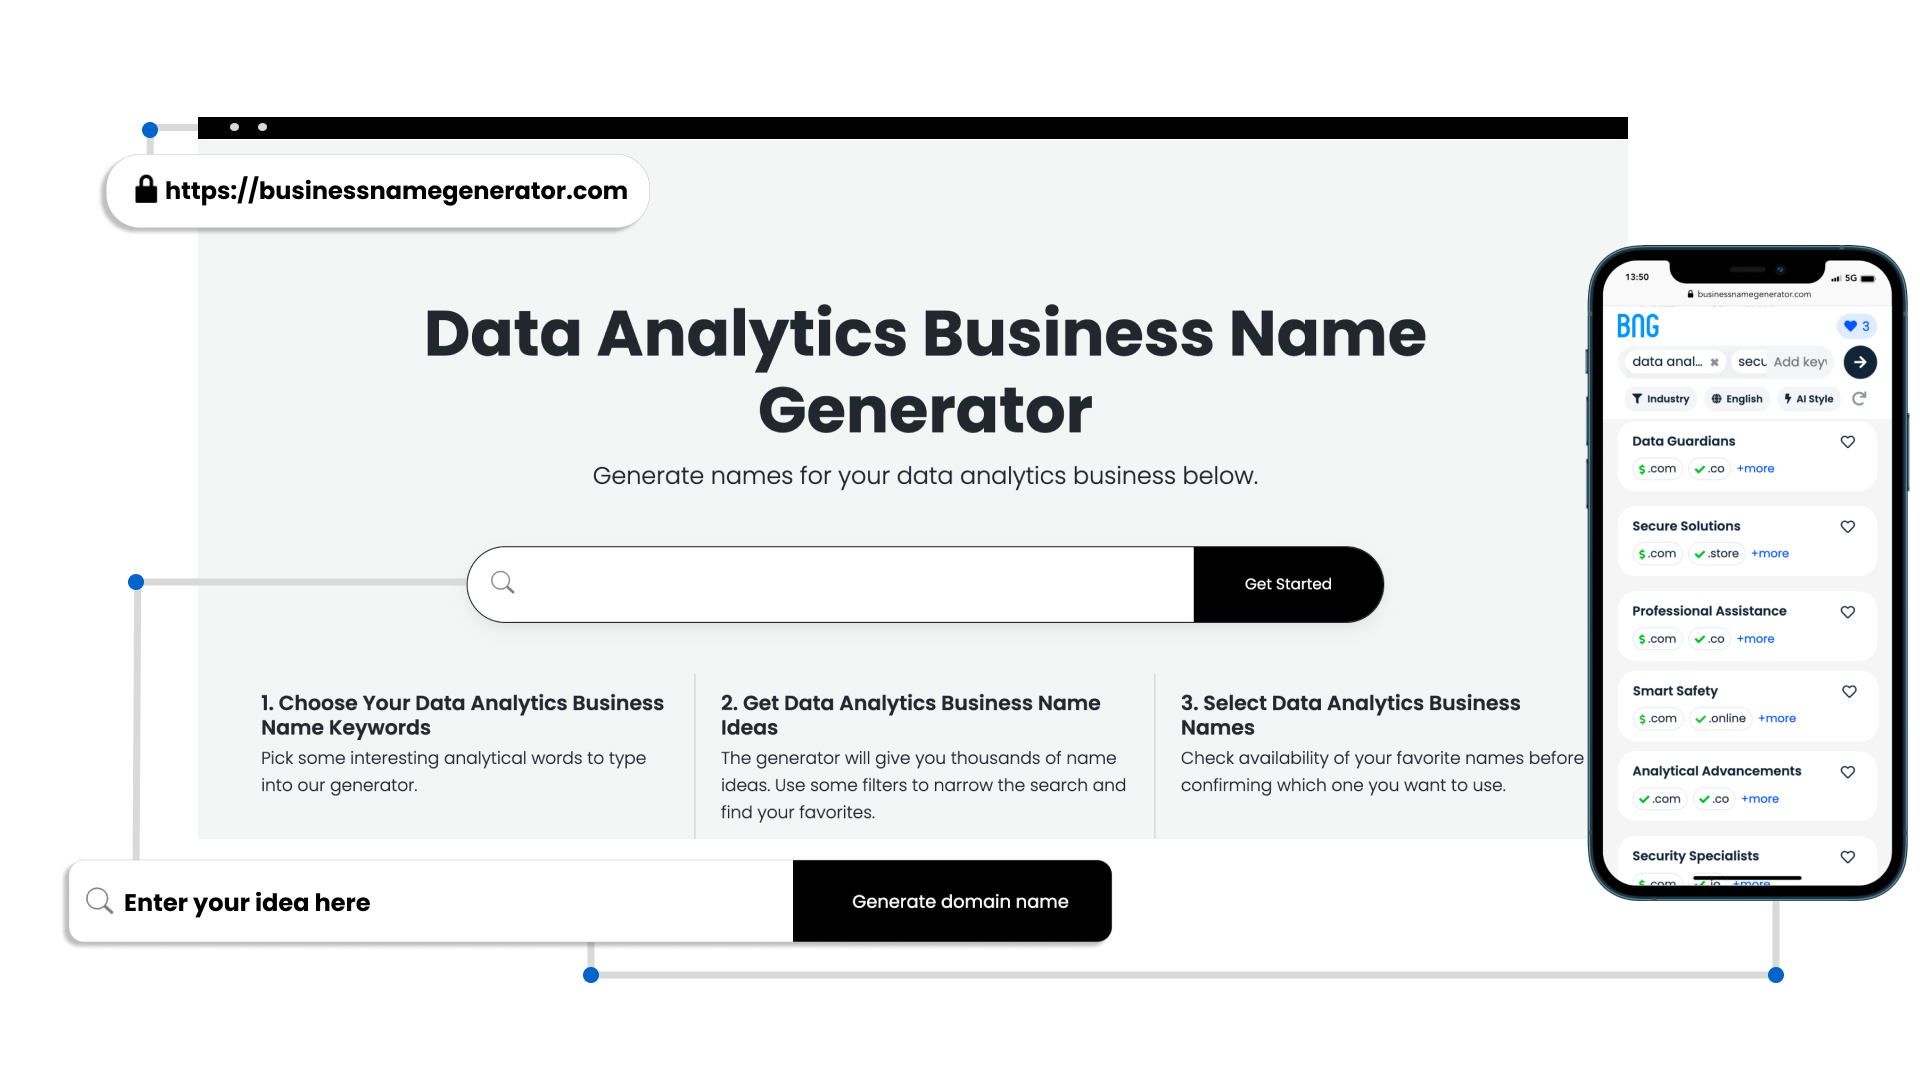 Benefits of Our Data Analytics Business Name Generator